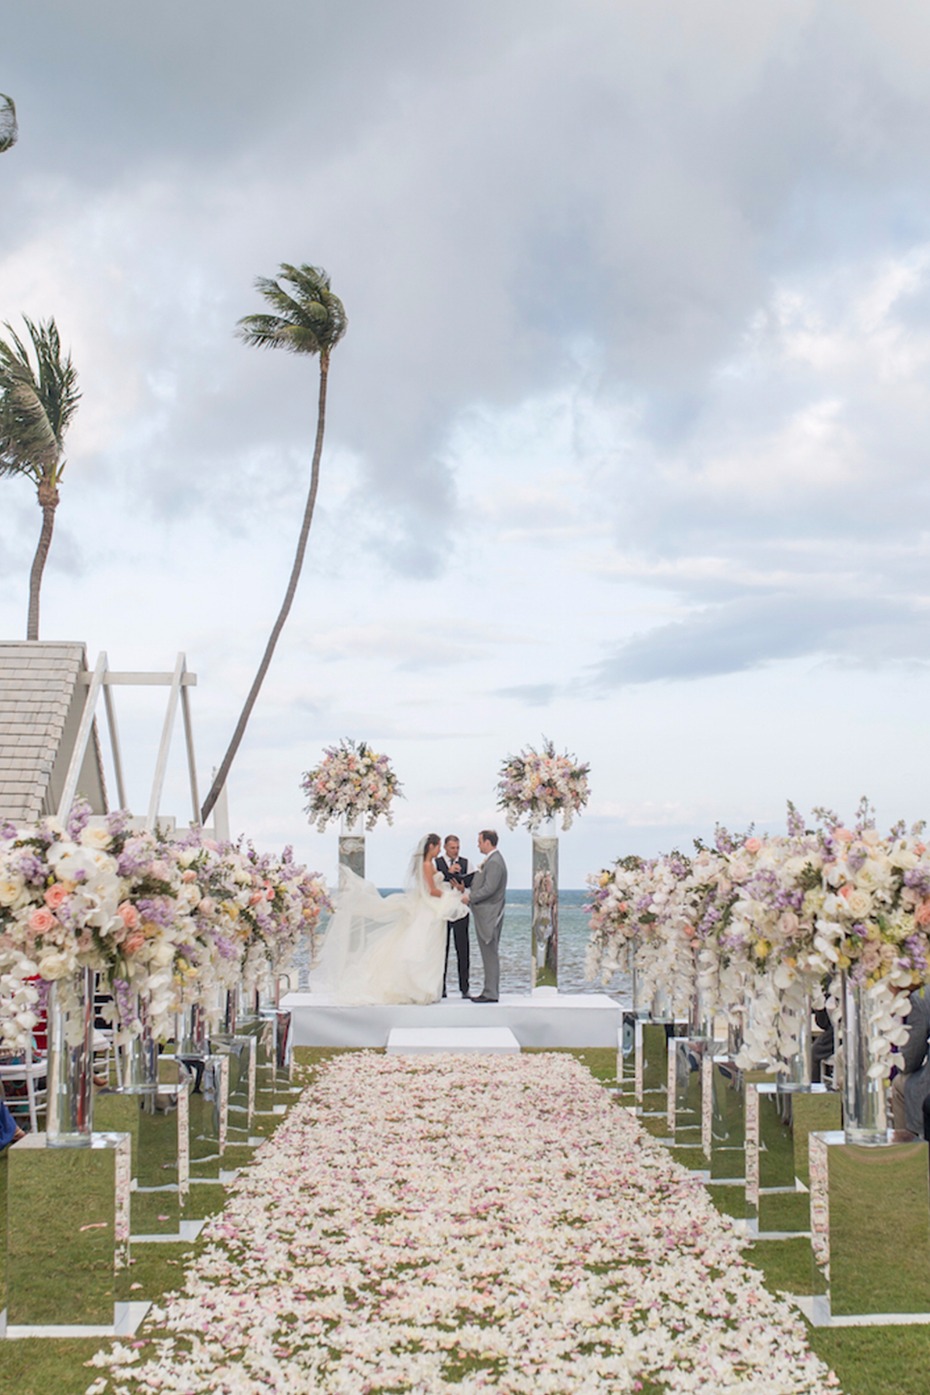 Flower filled ceremony in Thailand